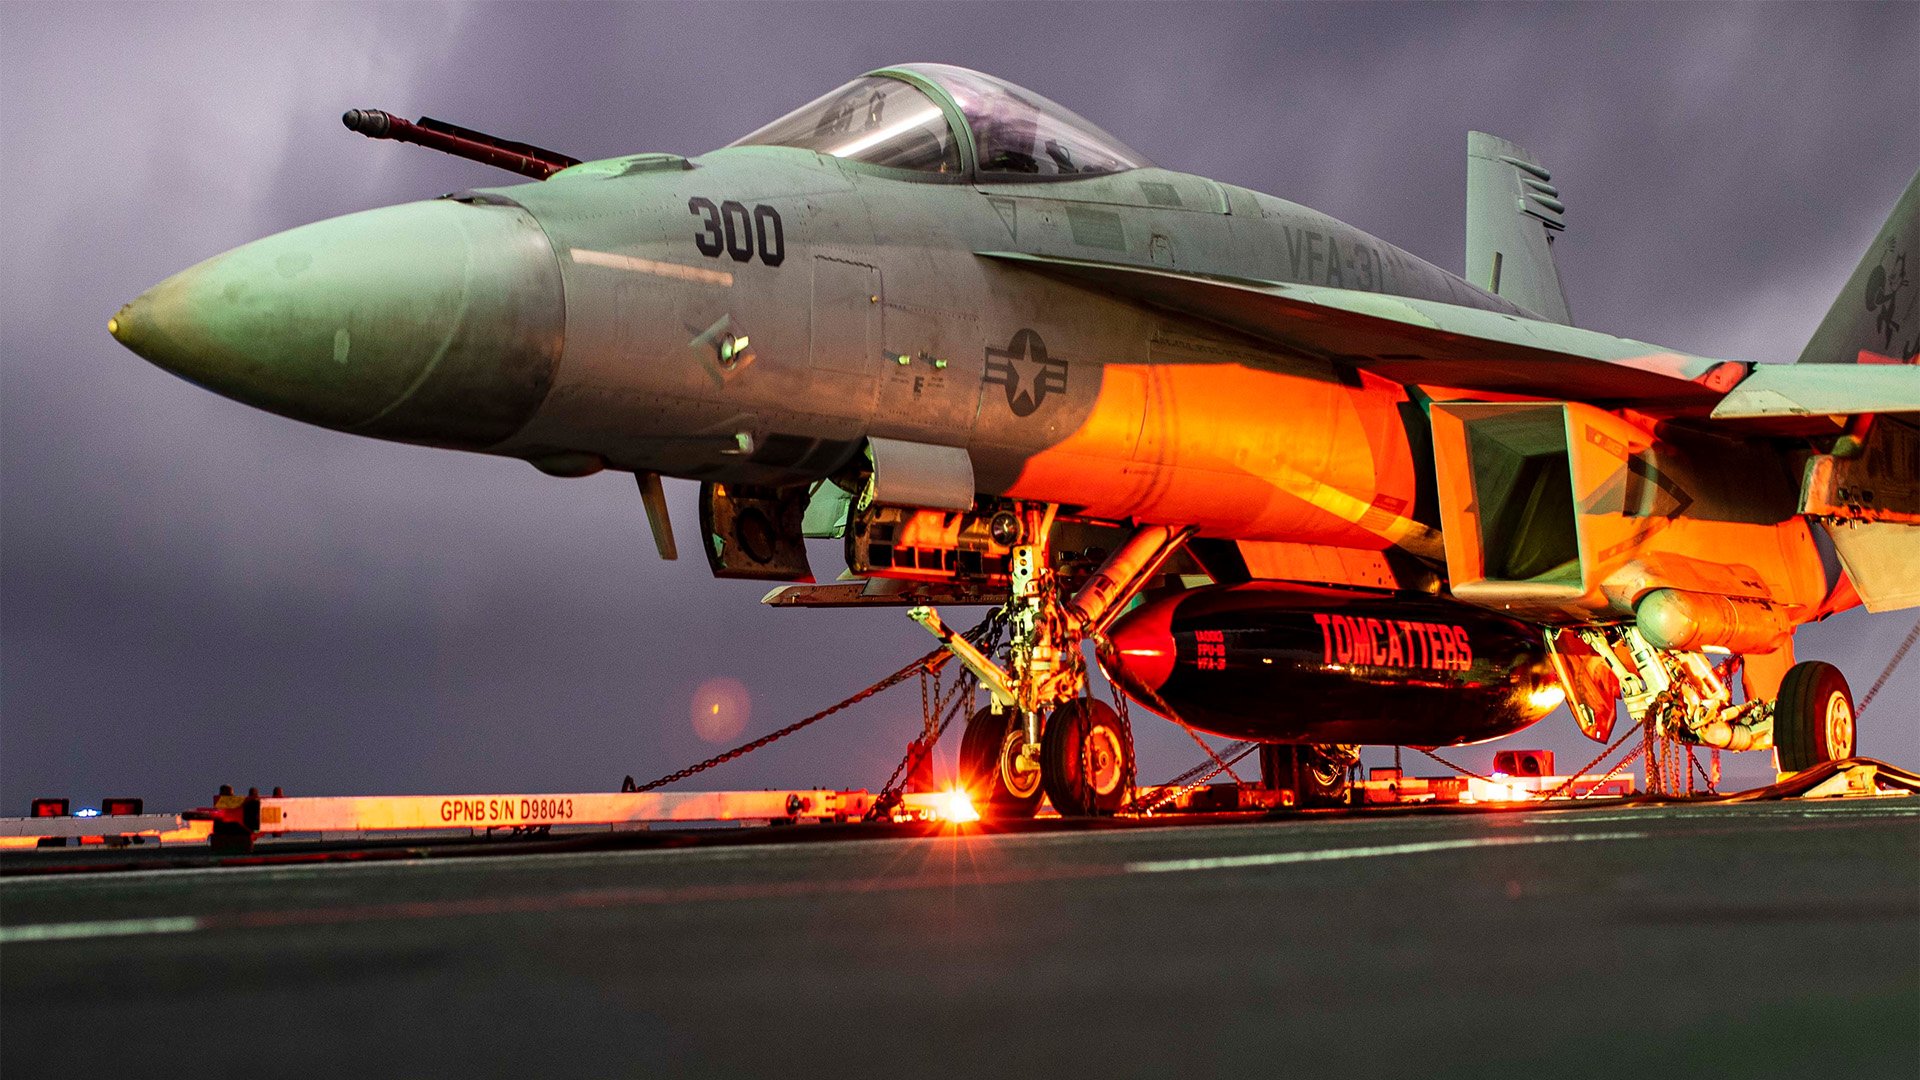 An F/A-18E Super Hornet from the "Tomcatters" of Strike Fighter Squadron 31 is chocked and chained on the aircraft carrier Gerald R. Ford’s flight deck, Nov. 7, 2022, while the flattop sailed the Atlantic Ocean. The Gerald R. Ford Carrier Strike Group is one of five NATO carriers patrolling European waters in November. US Navy photo by Mass Communication Specialist Seaman Apprentice Daniel Perez.